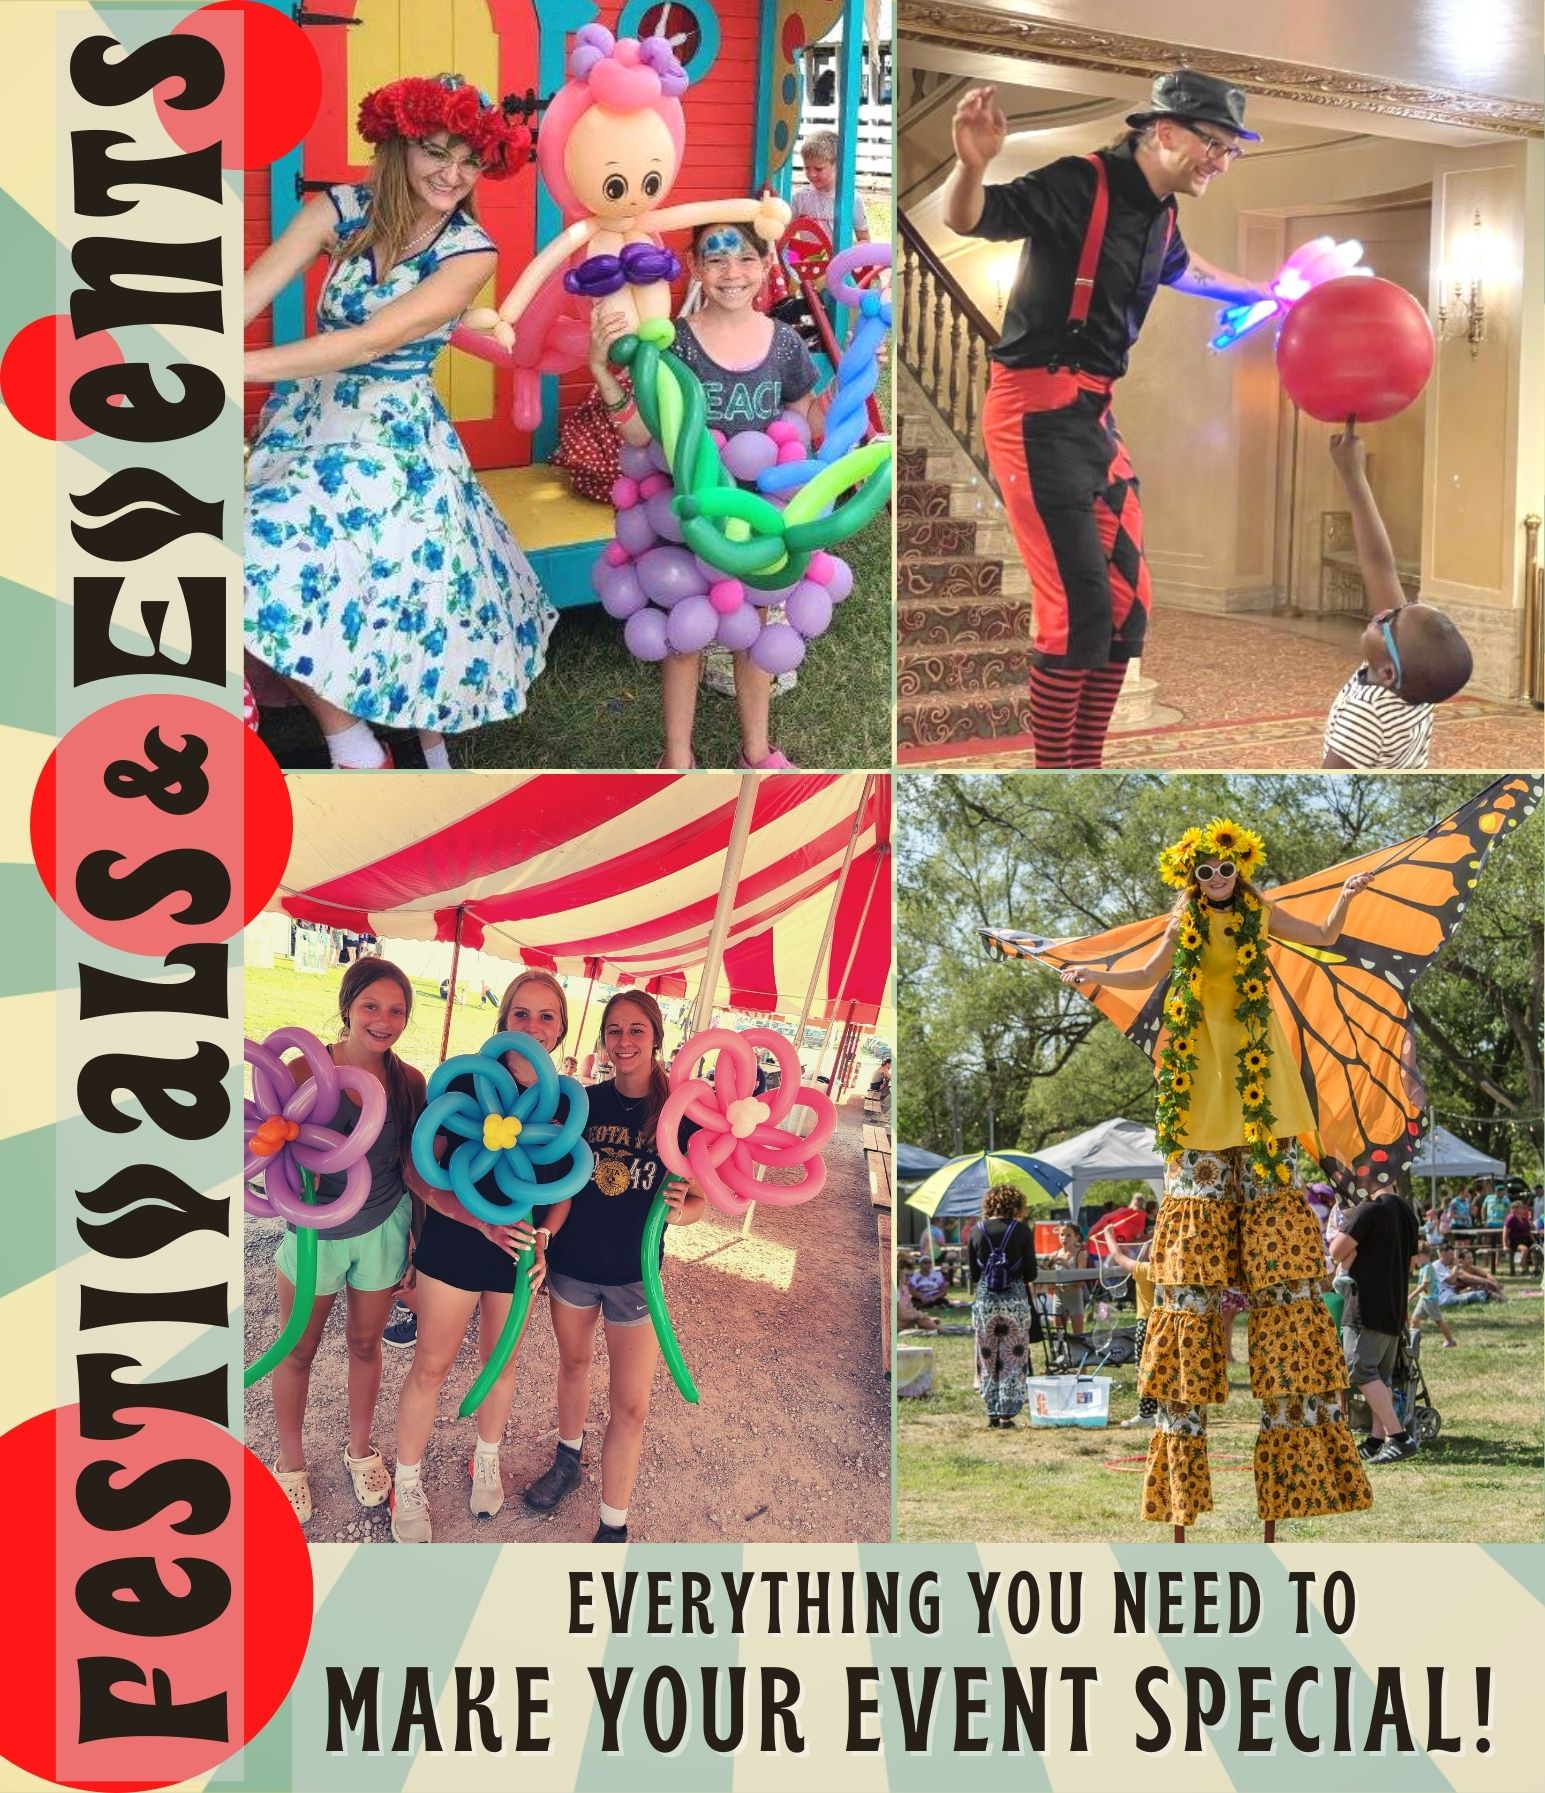 Polka Dot Entertainment has everything you need for Festivals and Local Events in Iowa and Nebraska